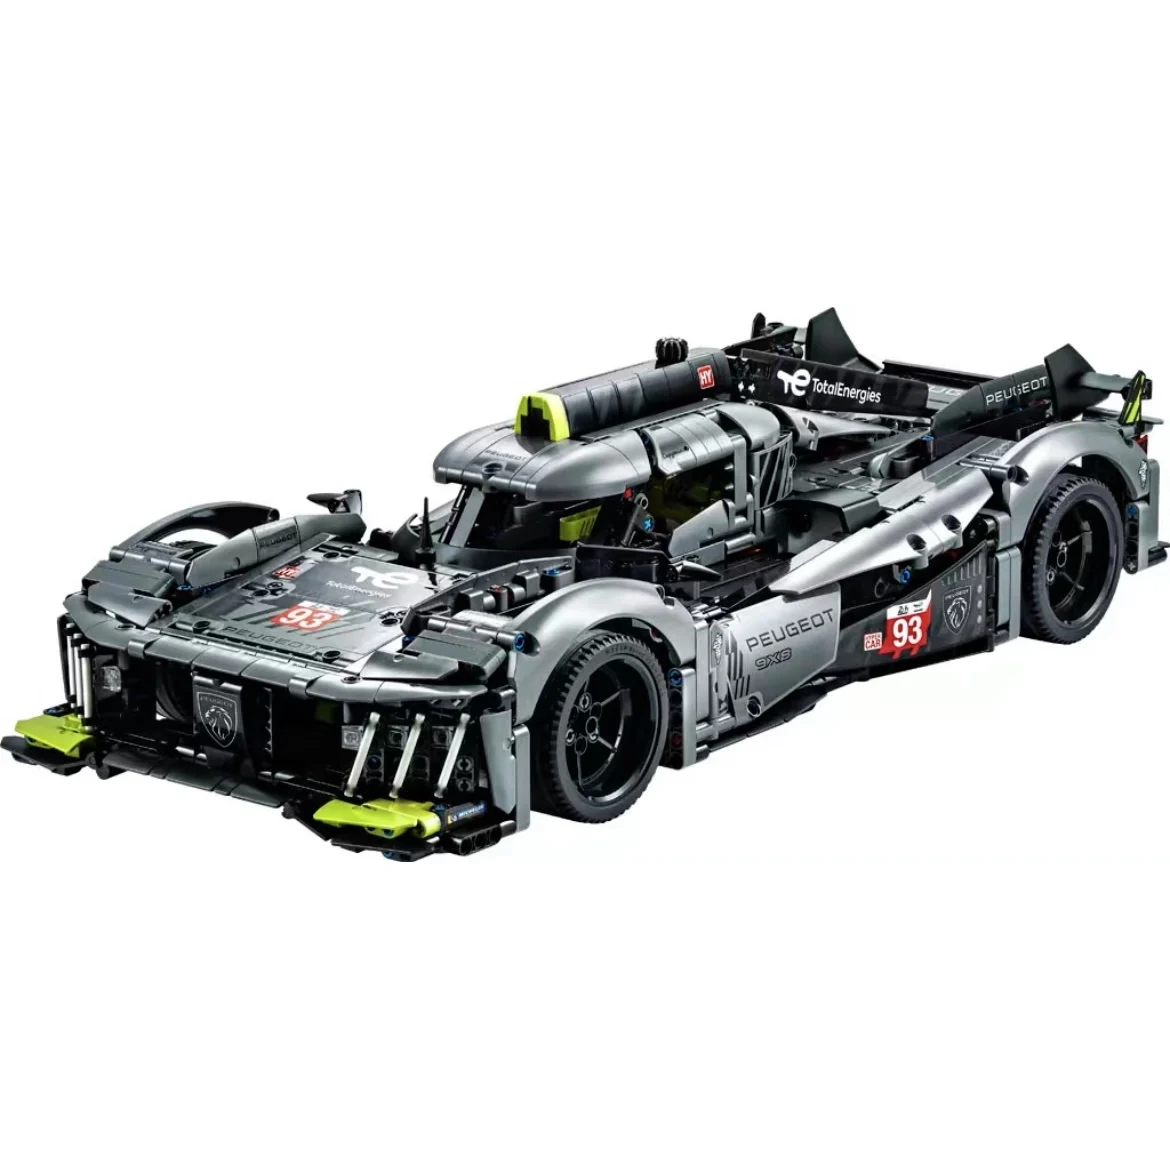 NEW 42156 Technical Peugeoted 9X8 Mans Hybrid Hypercar With lighting Super Racing Car Building Blocks Sportcar Brick Boy Adult images - 6